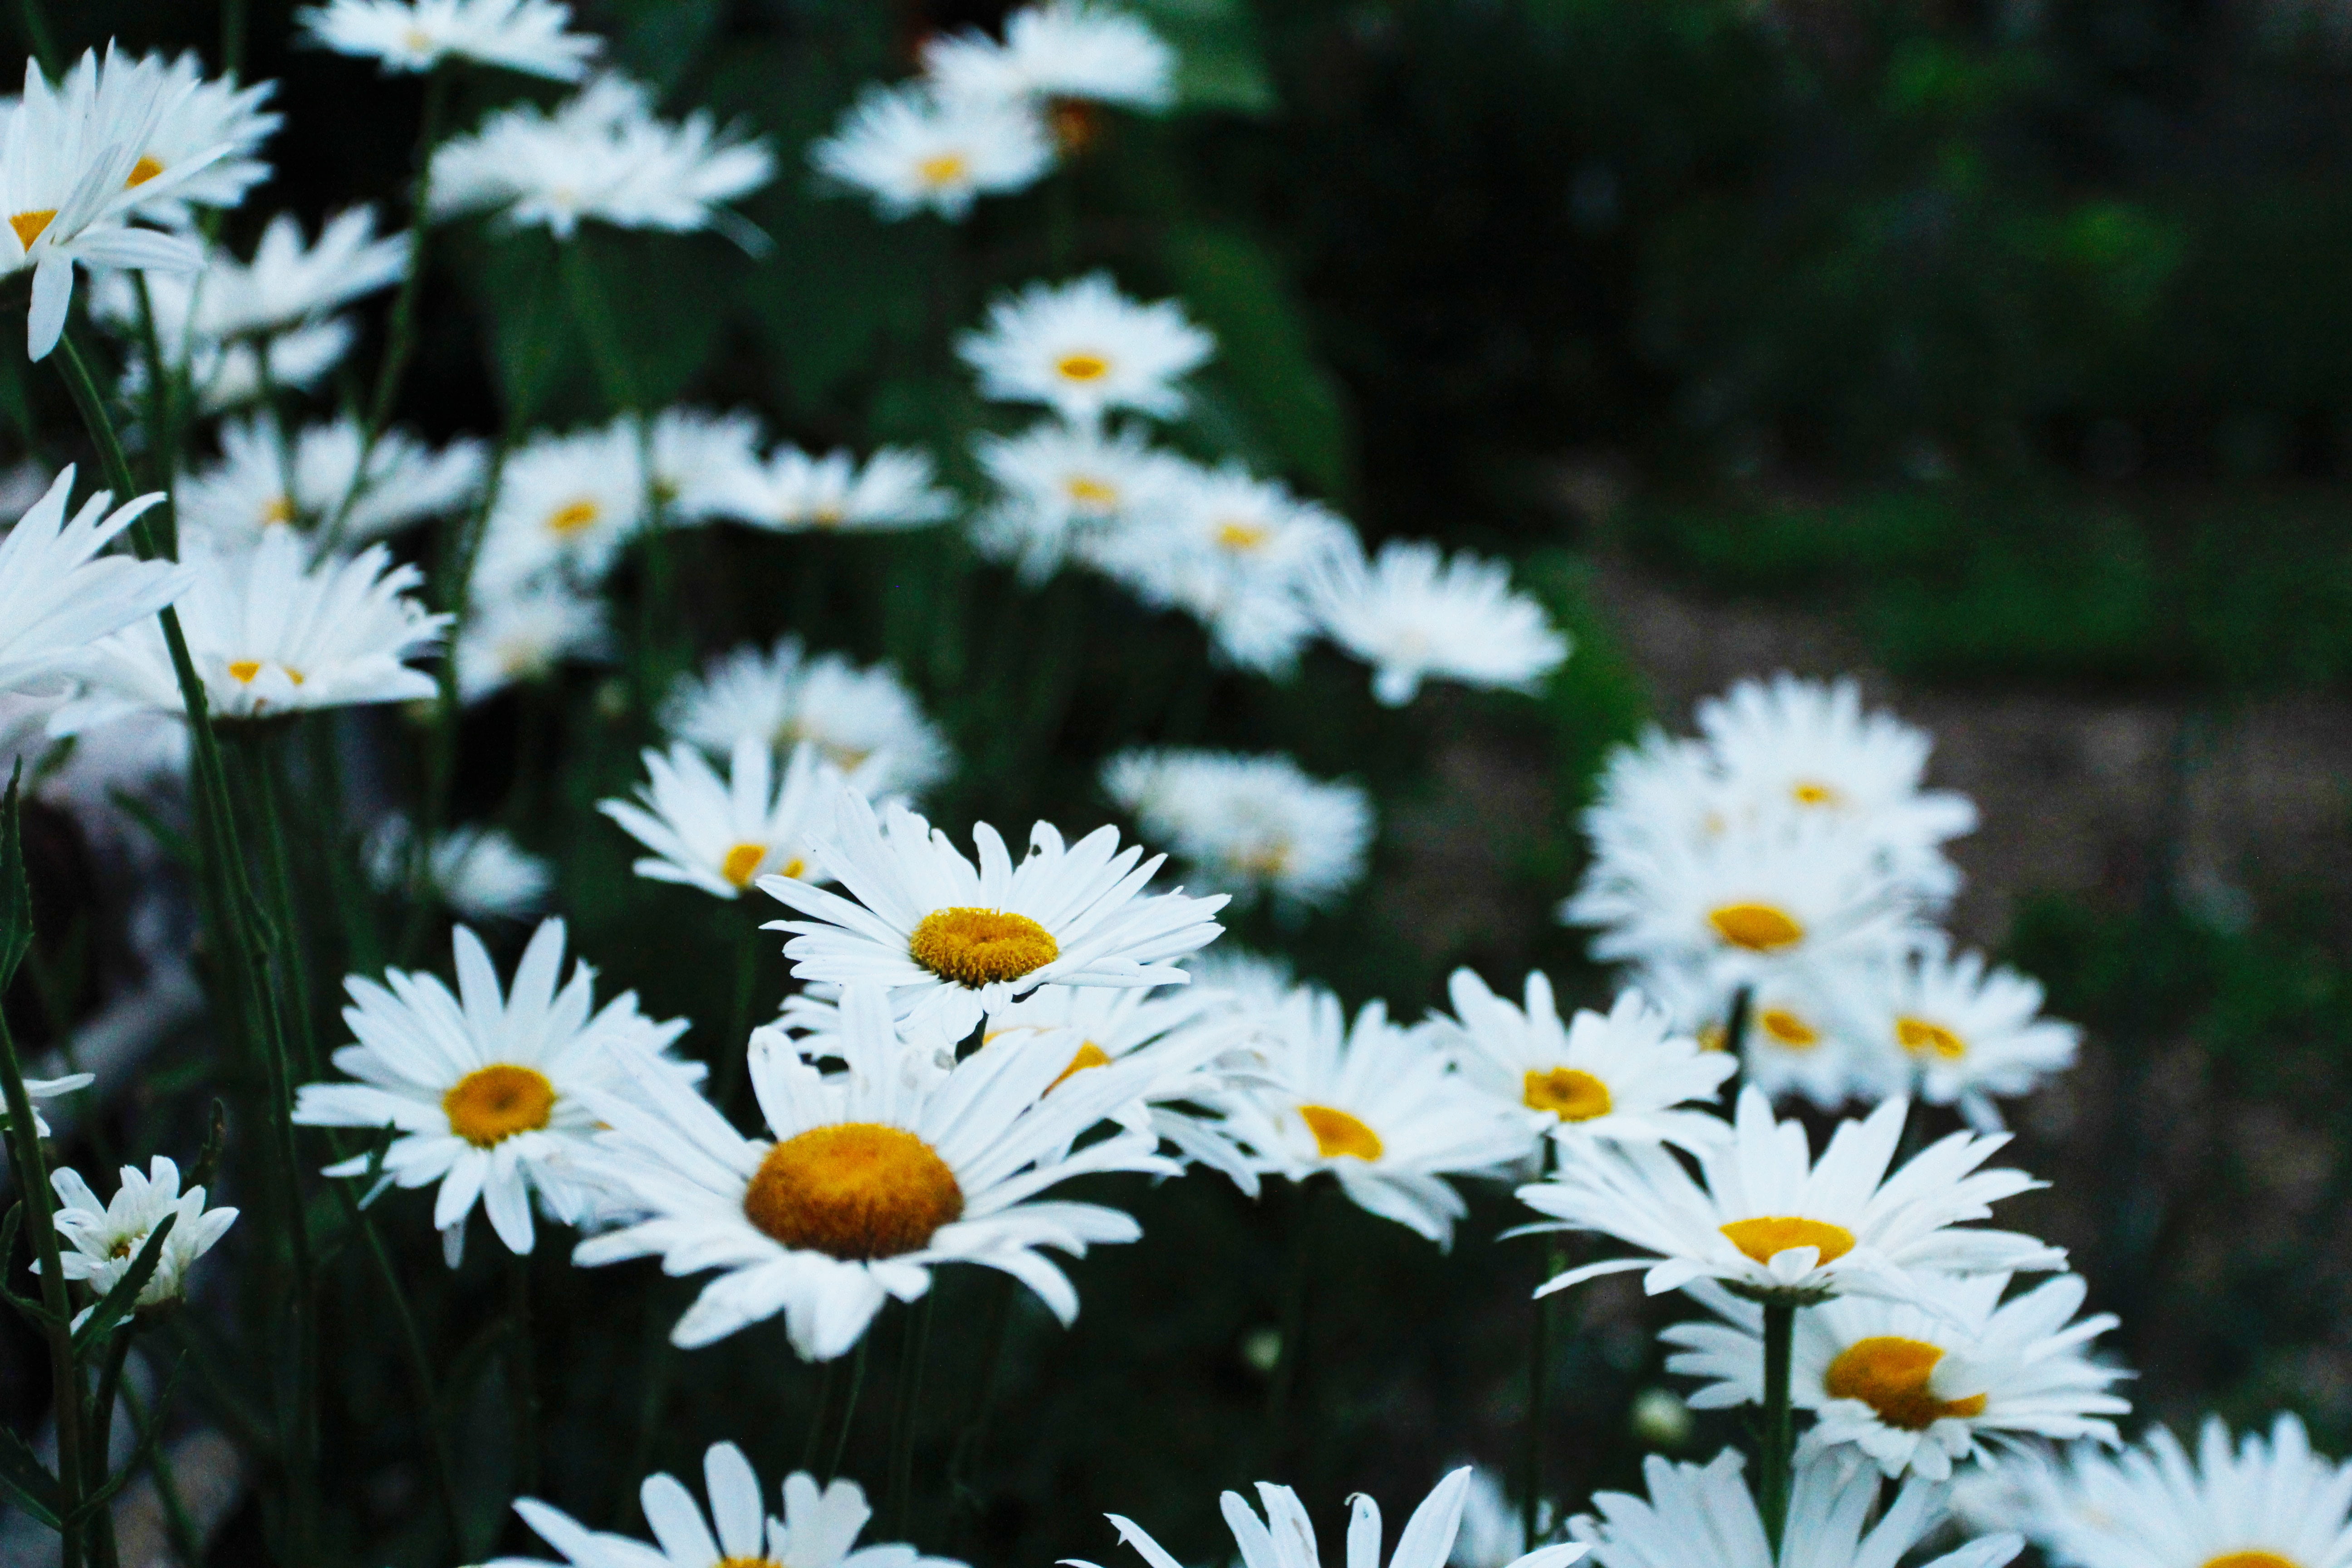 A field of white daisies with yellow centers. - Daisy